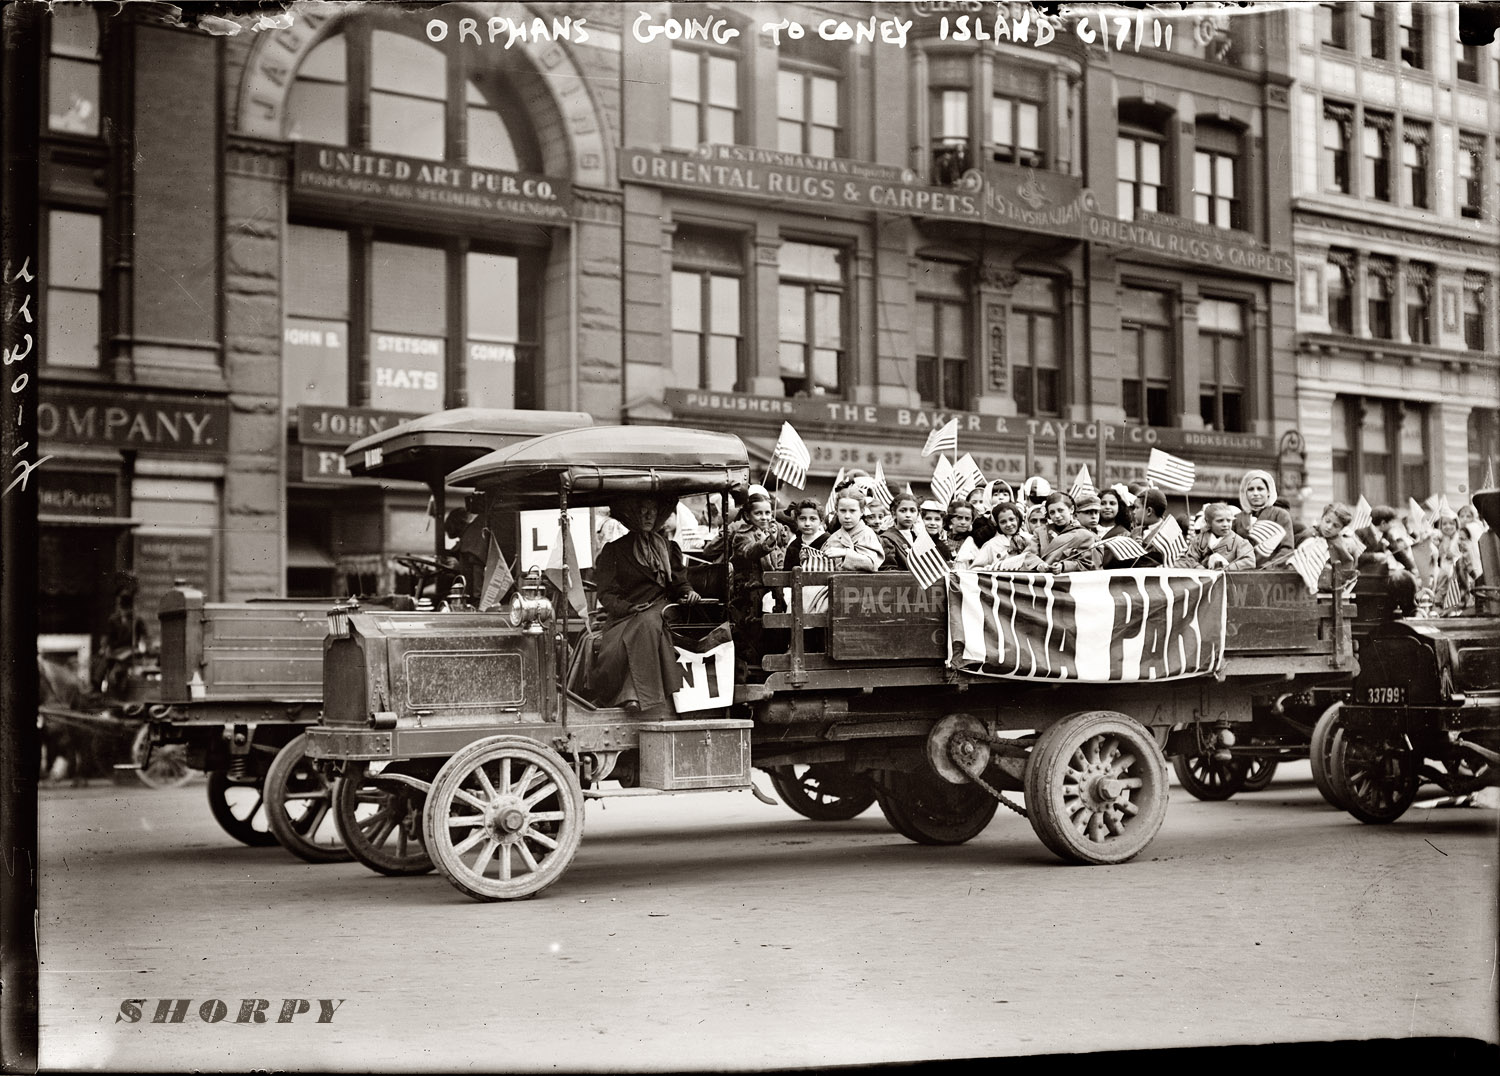 Orphans going to Coney Island (Luna Park). June 7, 1911. View full size. George Grantham Bain Collection.